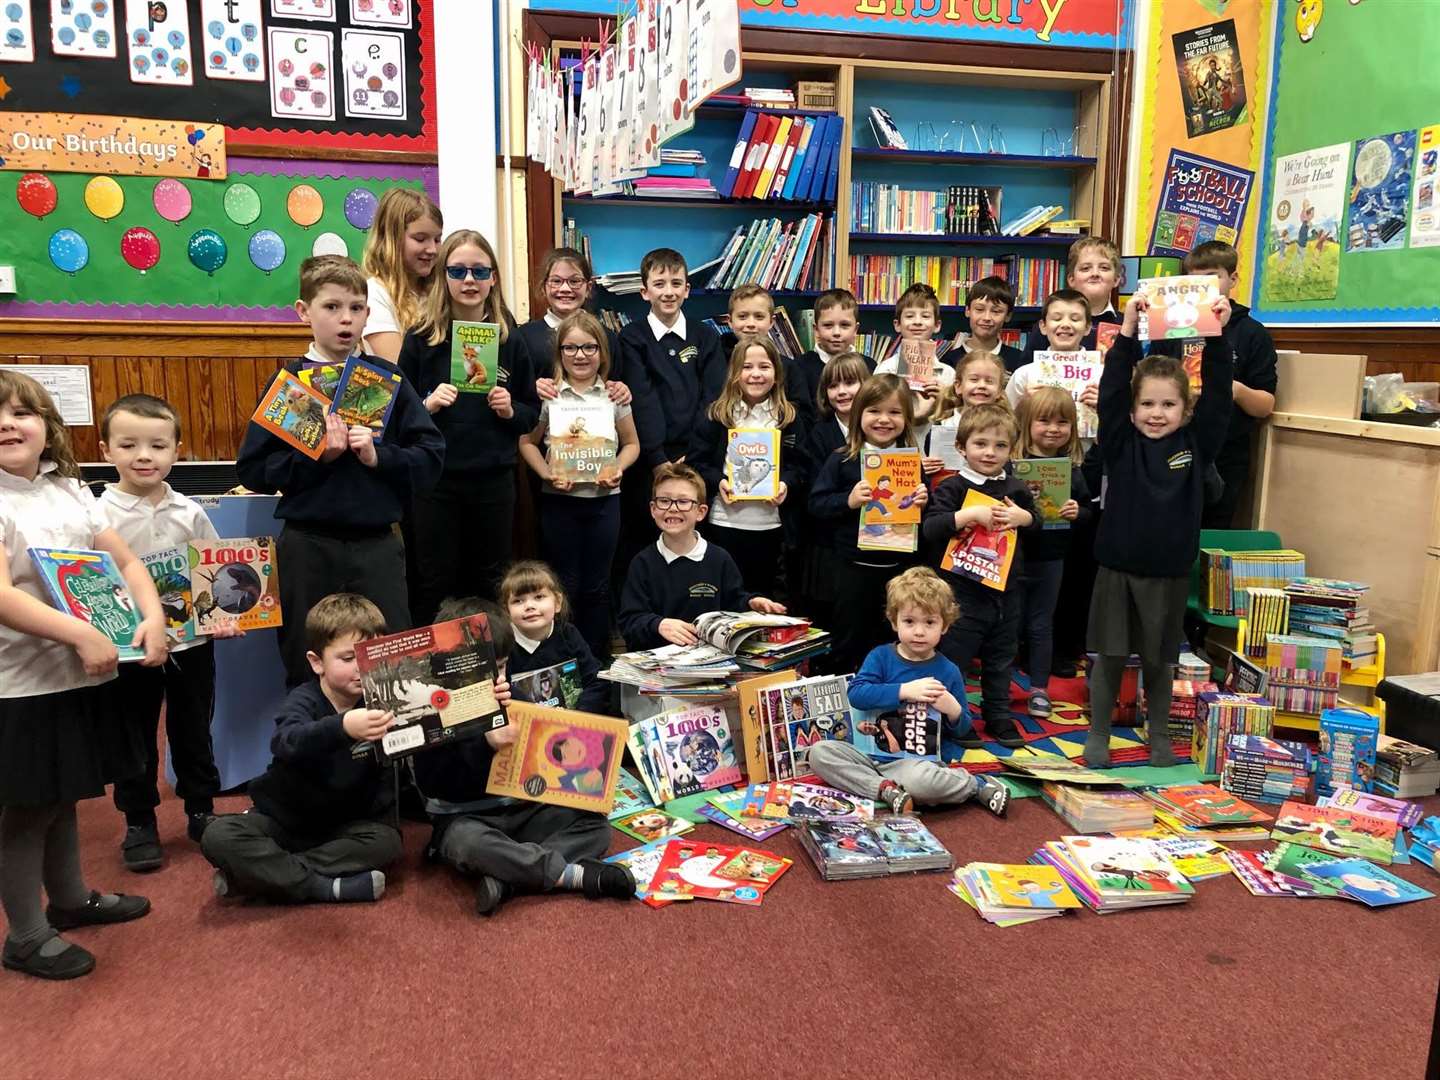 Bonar Bridge Primary School and Nusery now has a cornucopia of books after years during which funding restraints meant no new books could be bought.